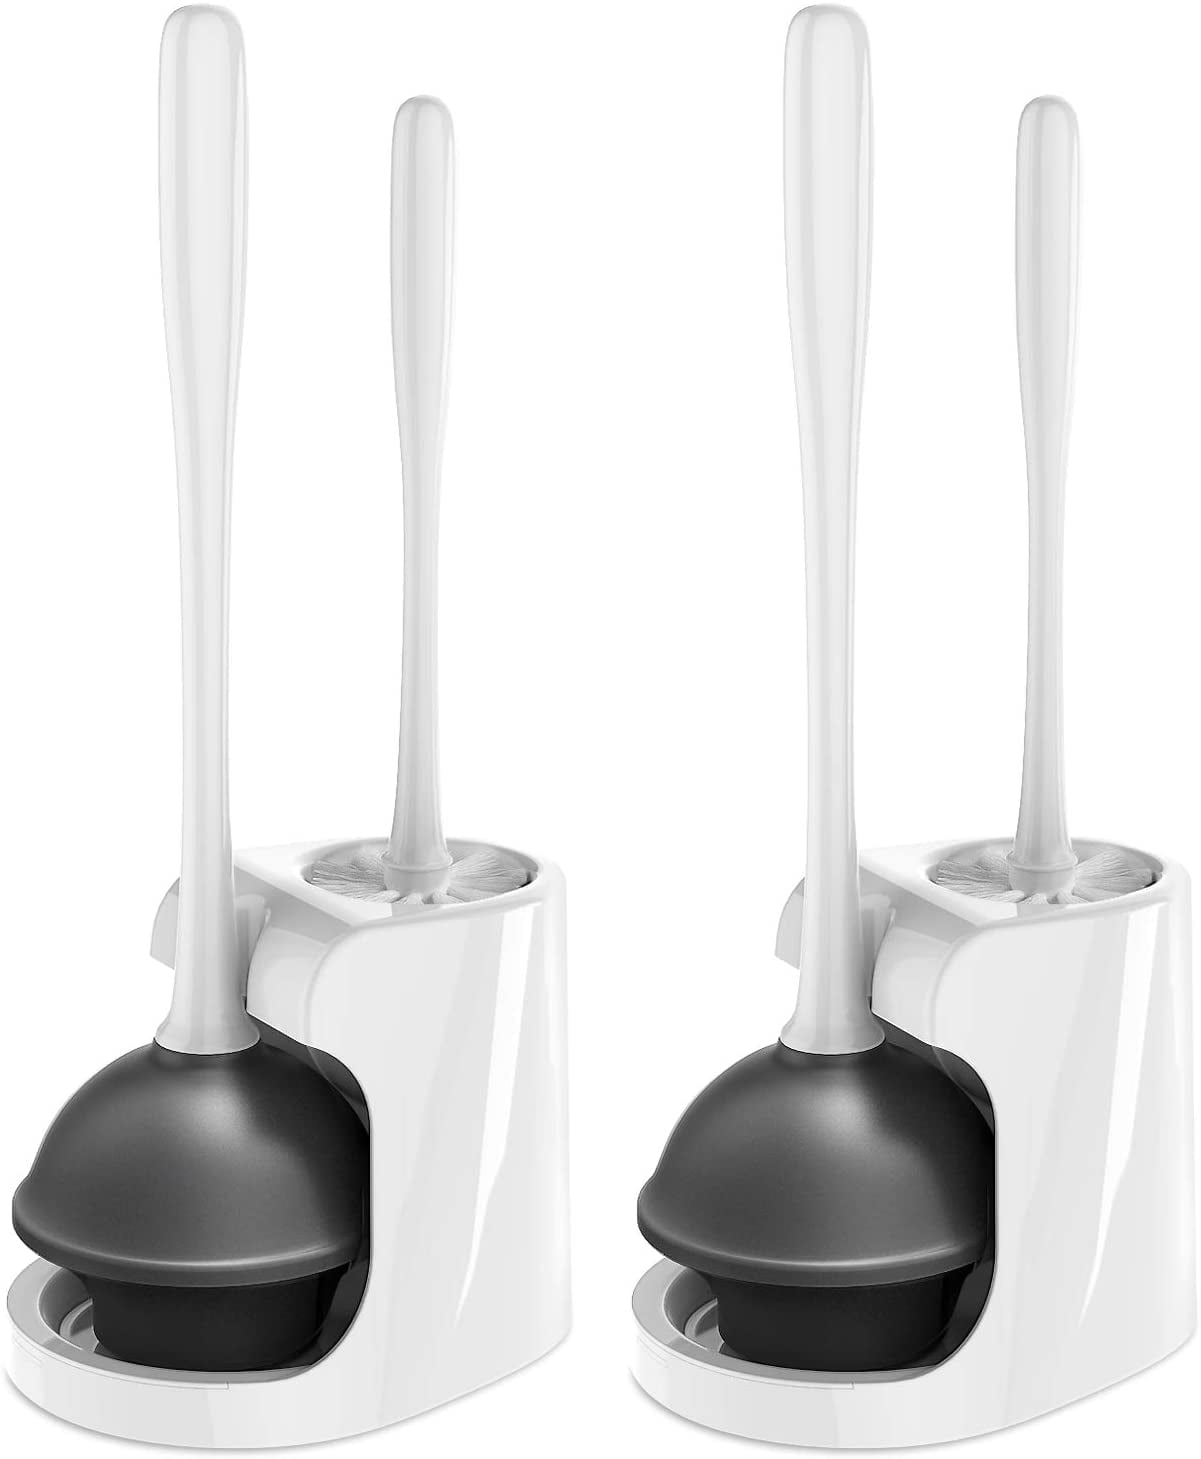 New Two-in-One Toilet Bowl Bathroom Plunger/Brush Cleaning Set 